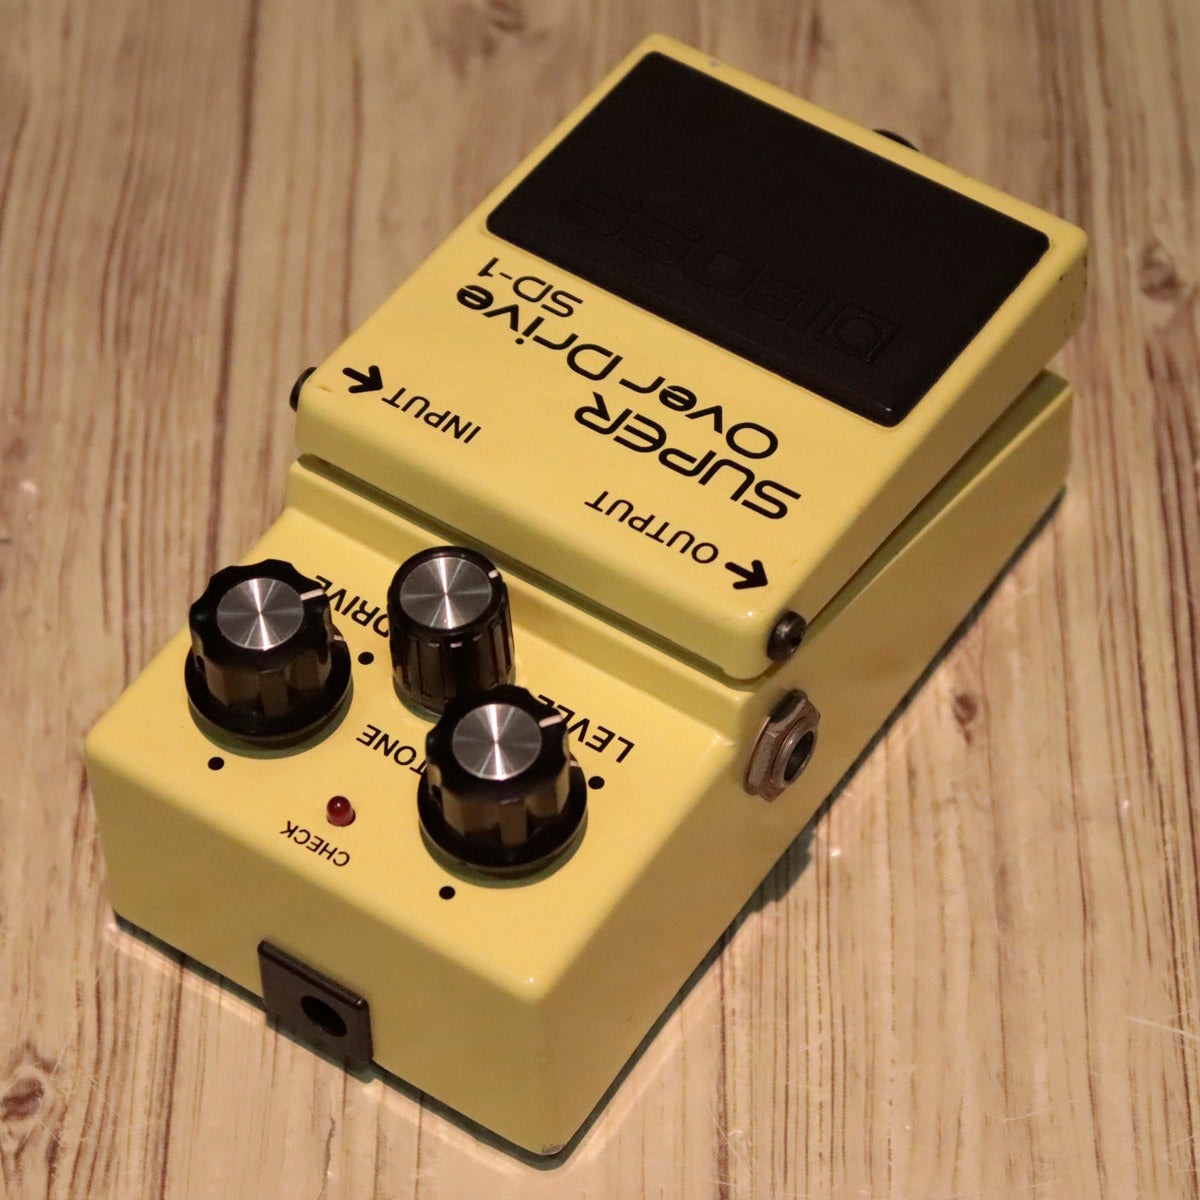 BOSS SD-1 made in japan 【88%OFF!】 - ギター